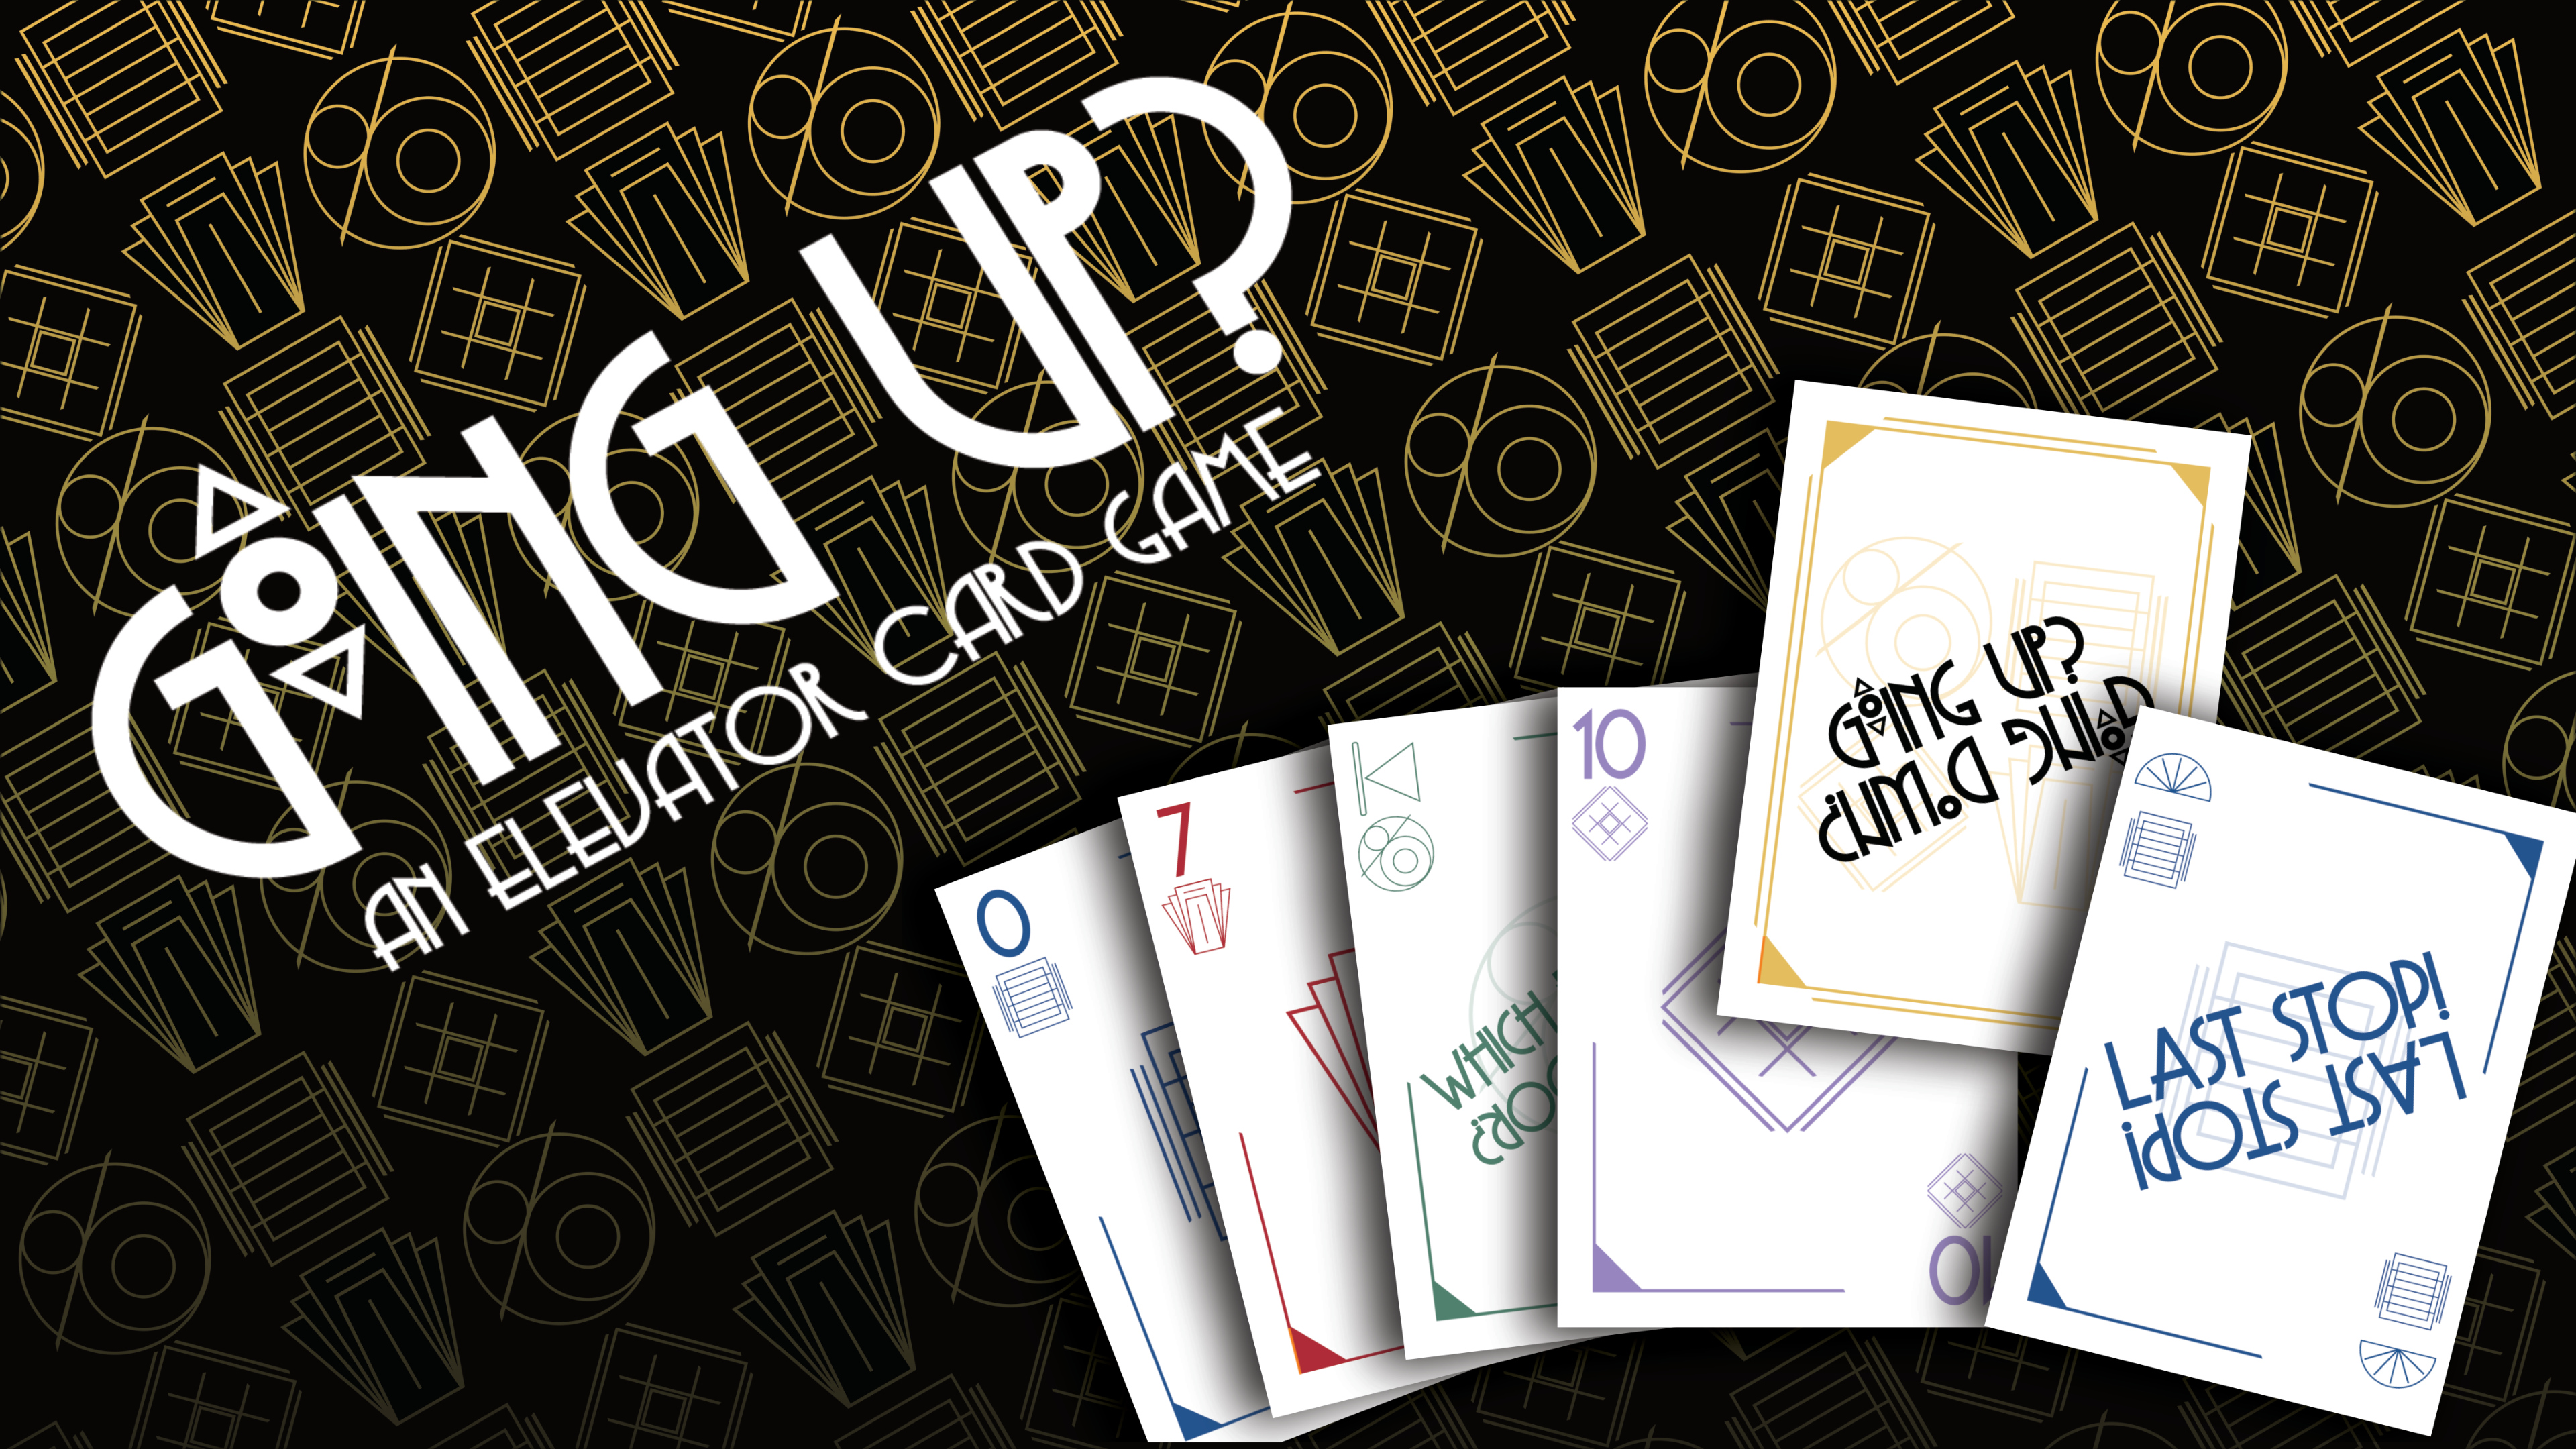 Going Up? An Elevator Card Game